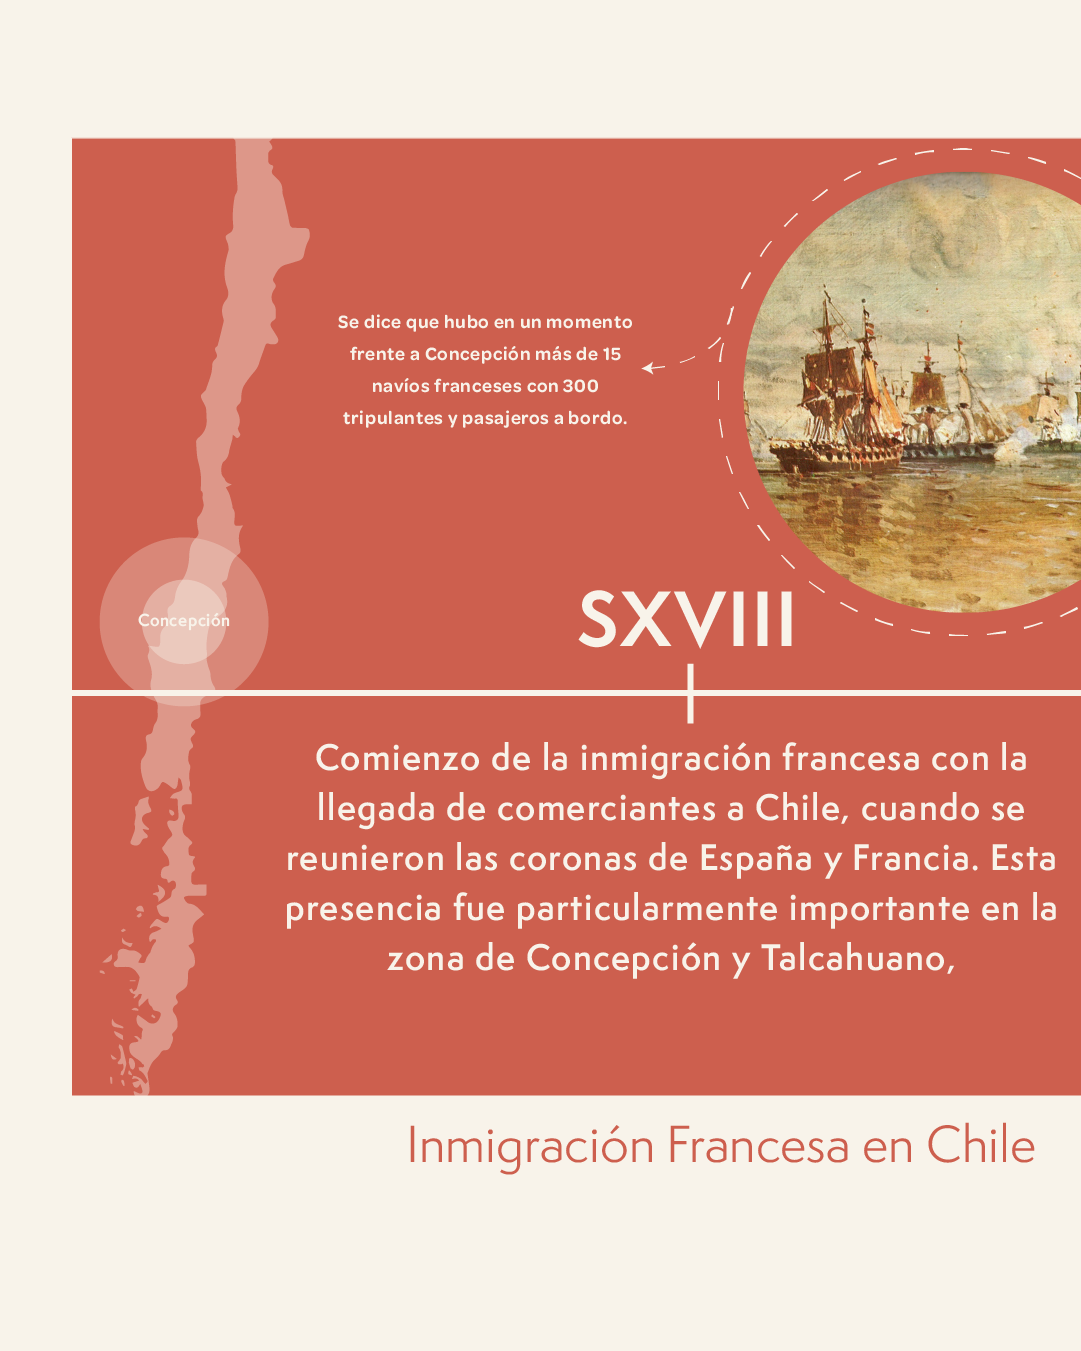 History of French Immigration in Chile